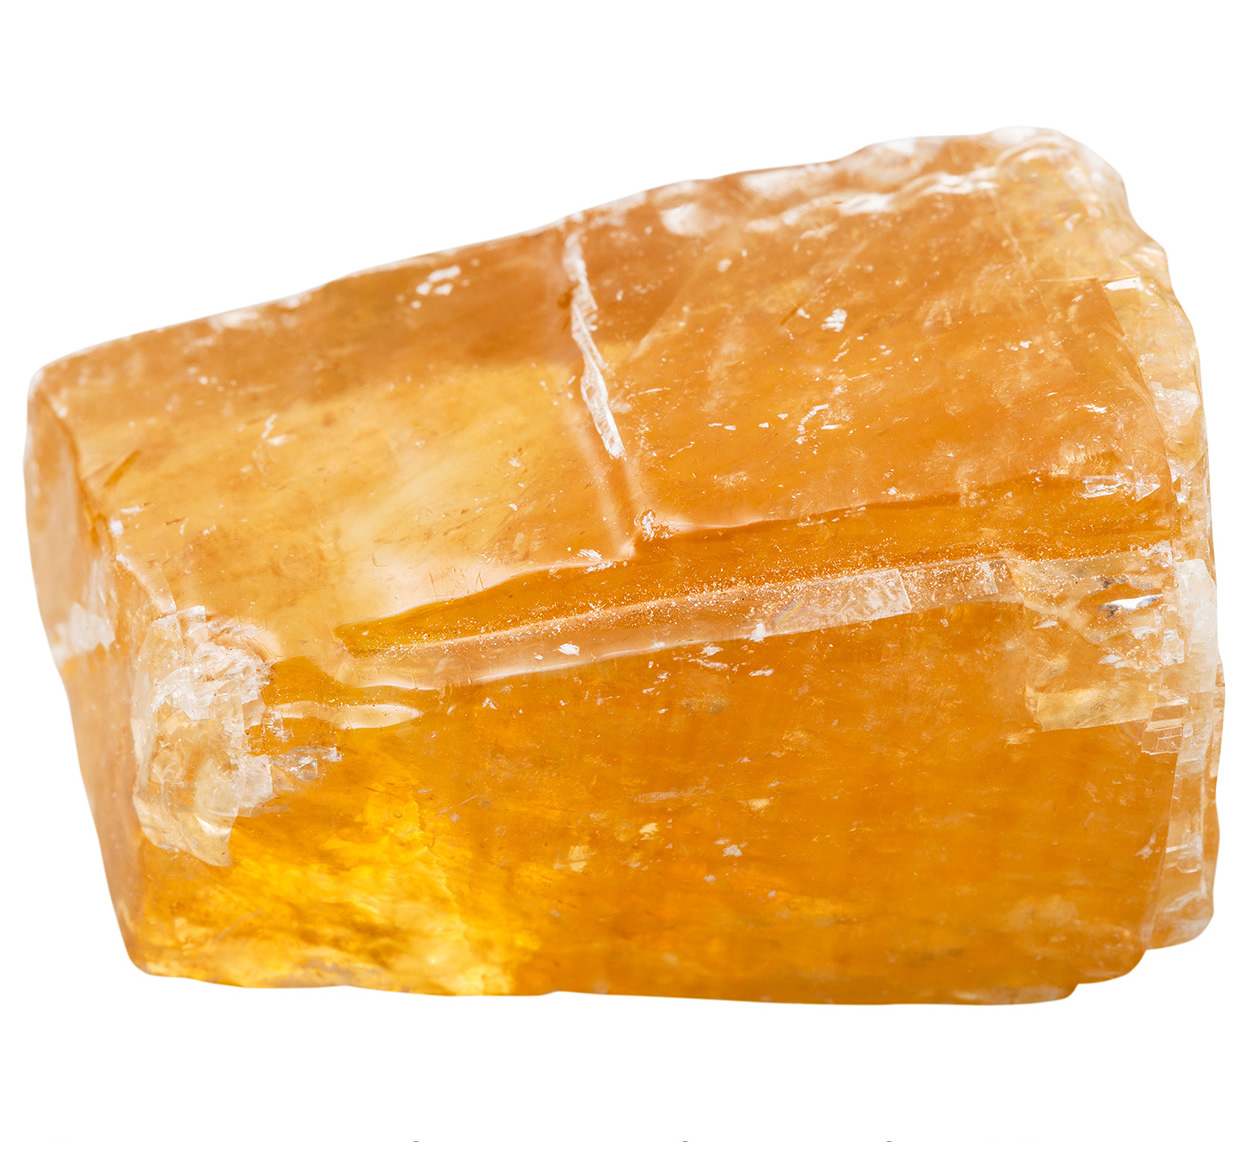 Orange calcite is an energizing stone that boosts your creativity and optimism, and gets you moving in positive directions.  Learn more about Orange Calcite meaning + healing properties, benefits & more. Visit to find gemstone meanings & info about crystal healing, stone powers, and chakra stones. Get some positive energy & vibes! #gemstones #crystals #crystalhealing #beadage